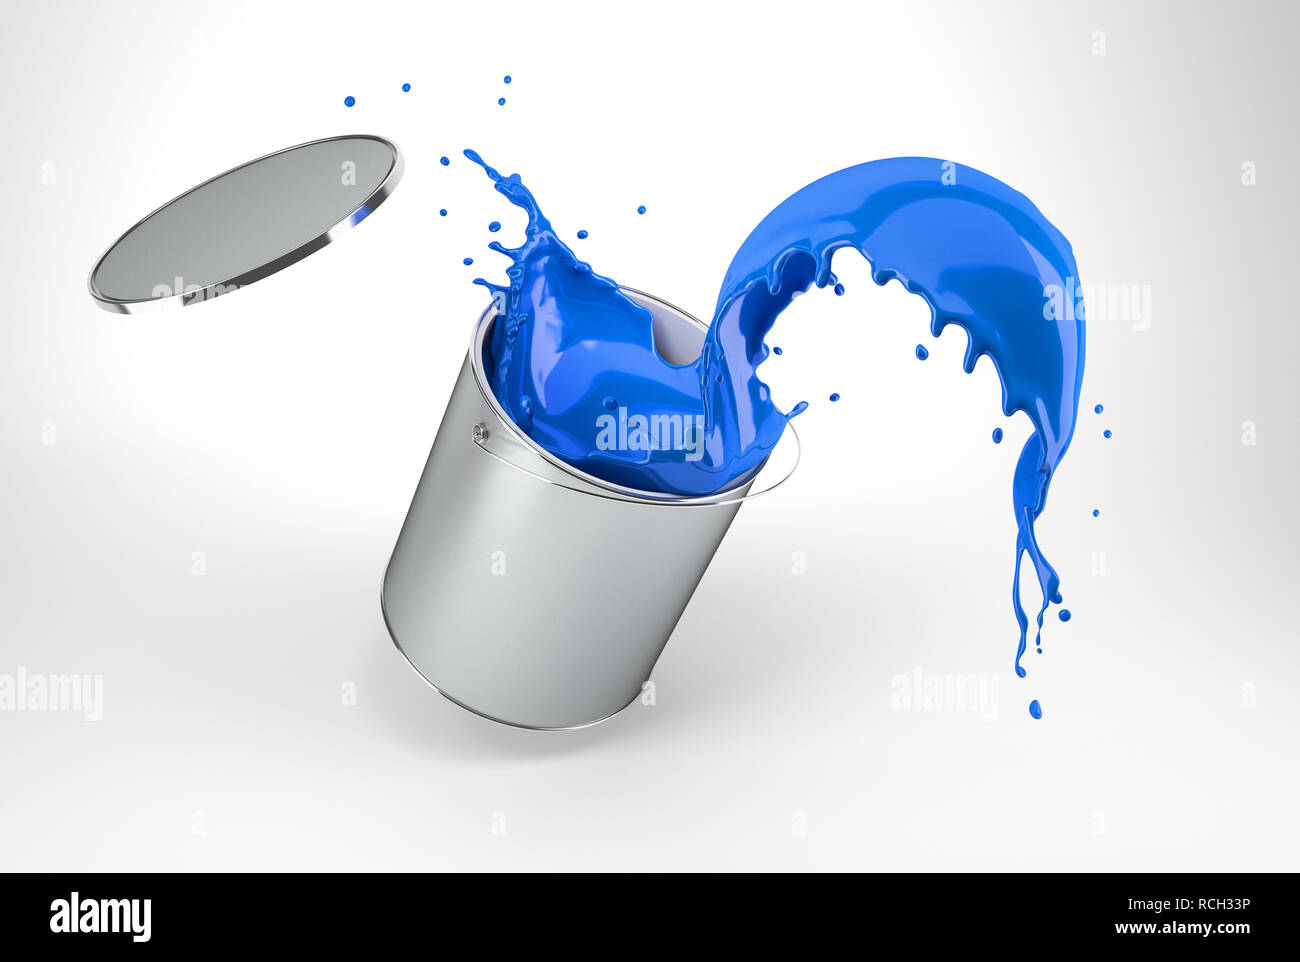 silver bucket full of vibrant blue paint, jumping with paint splashing. Isolated on white background with drop shadow. Stock Photo